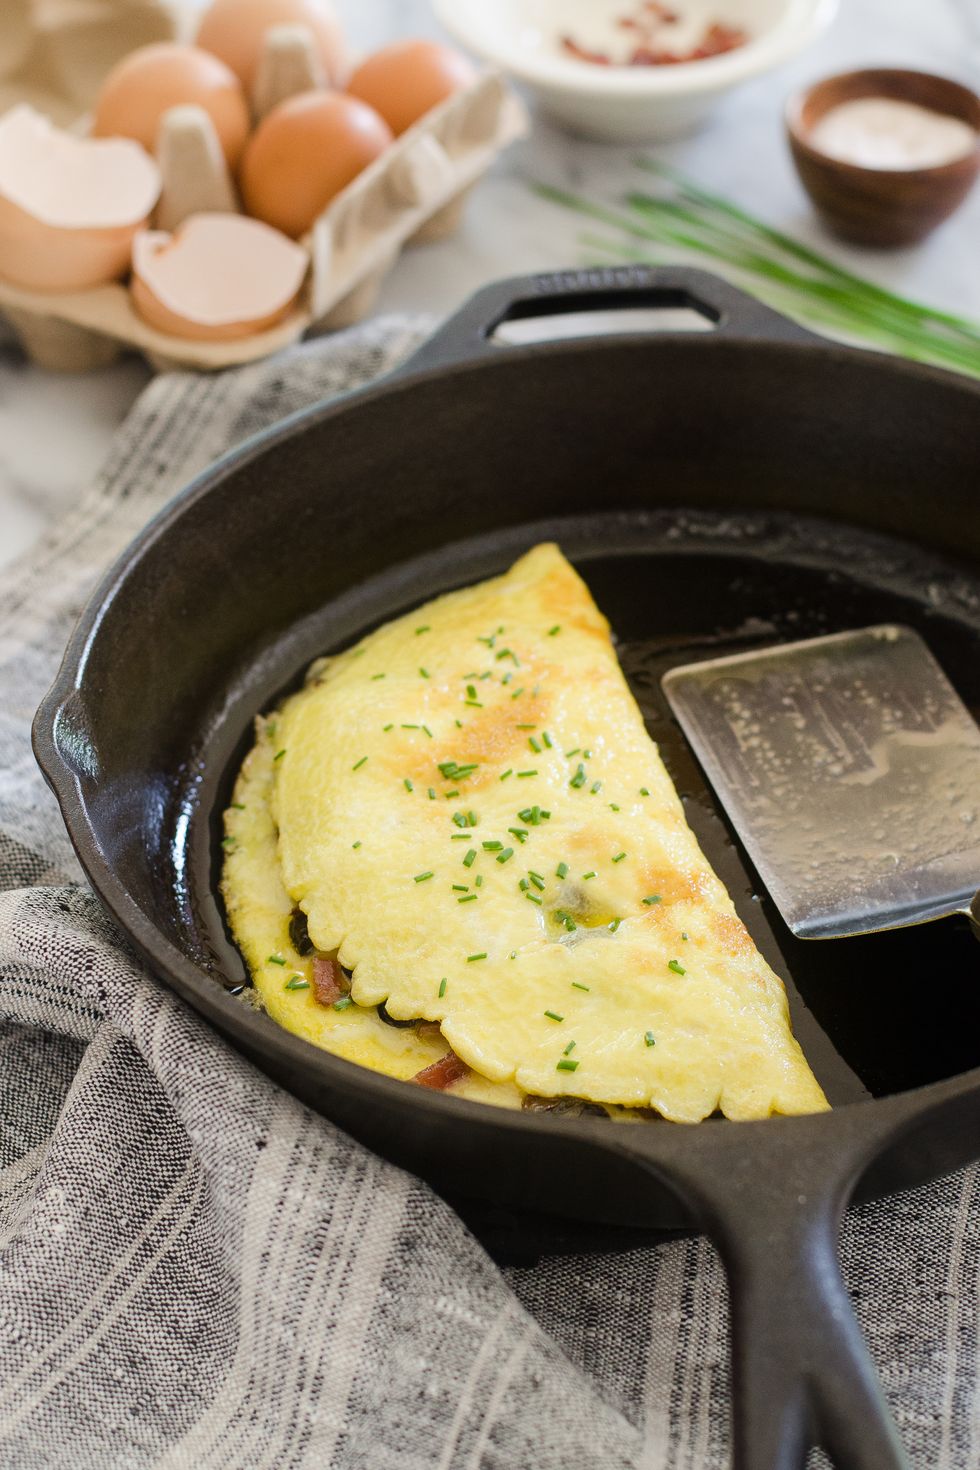 https://hips.hearstapps.com/thepioneerwoman/wp-content/uploads/2016/10/how-to-make-an-omelette-14.jpg?resize=980:*